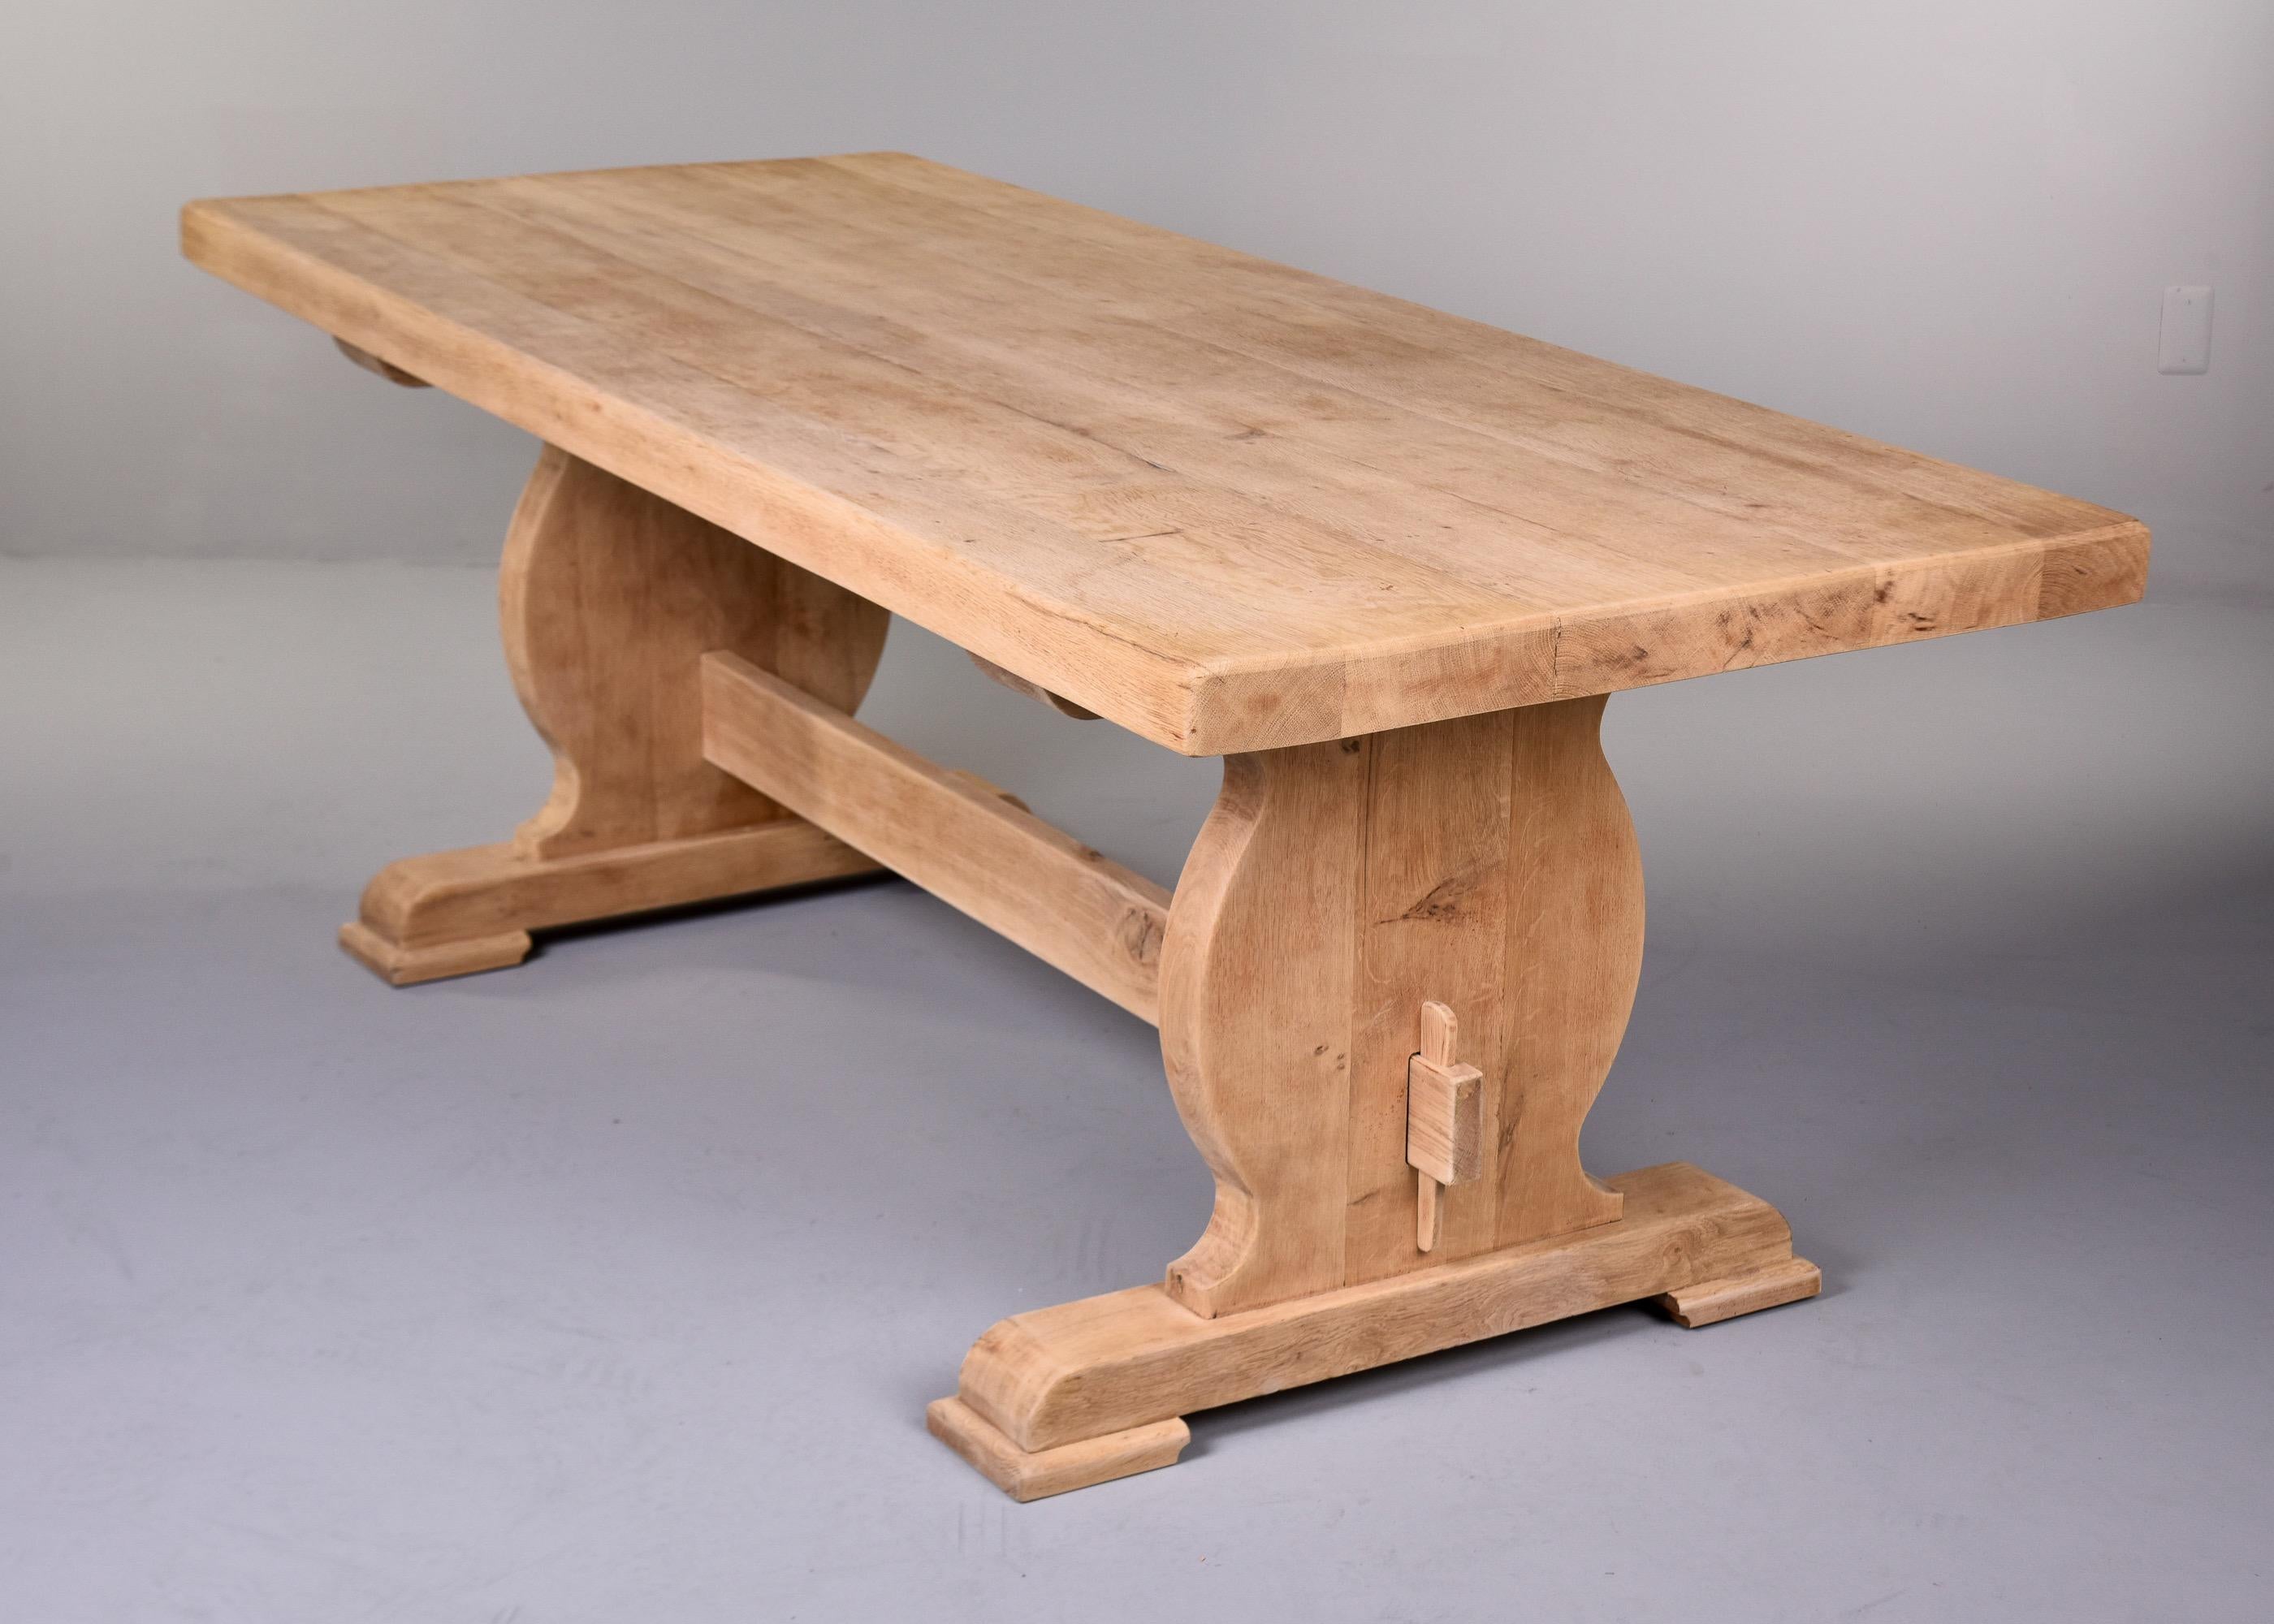 Circa 1900 Sanded Bare Oak French Country Trestle Table 1